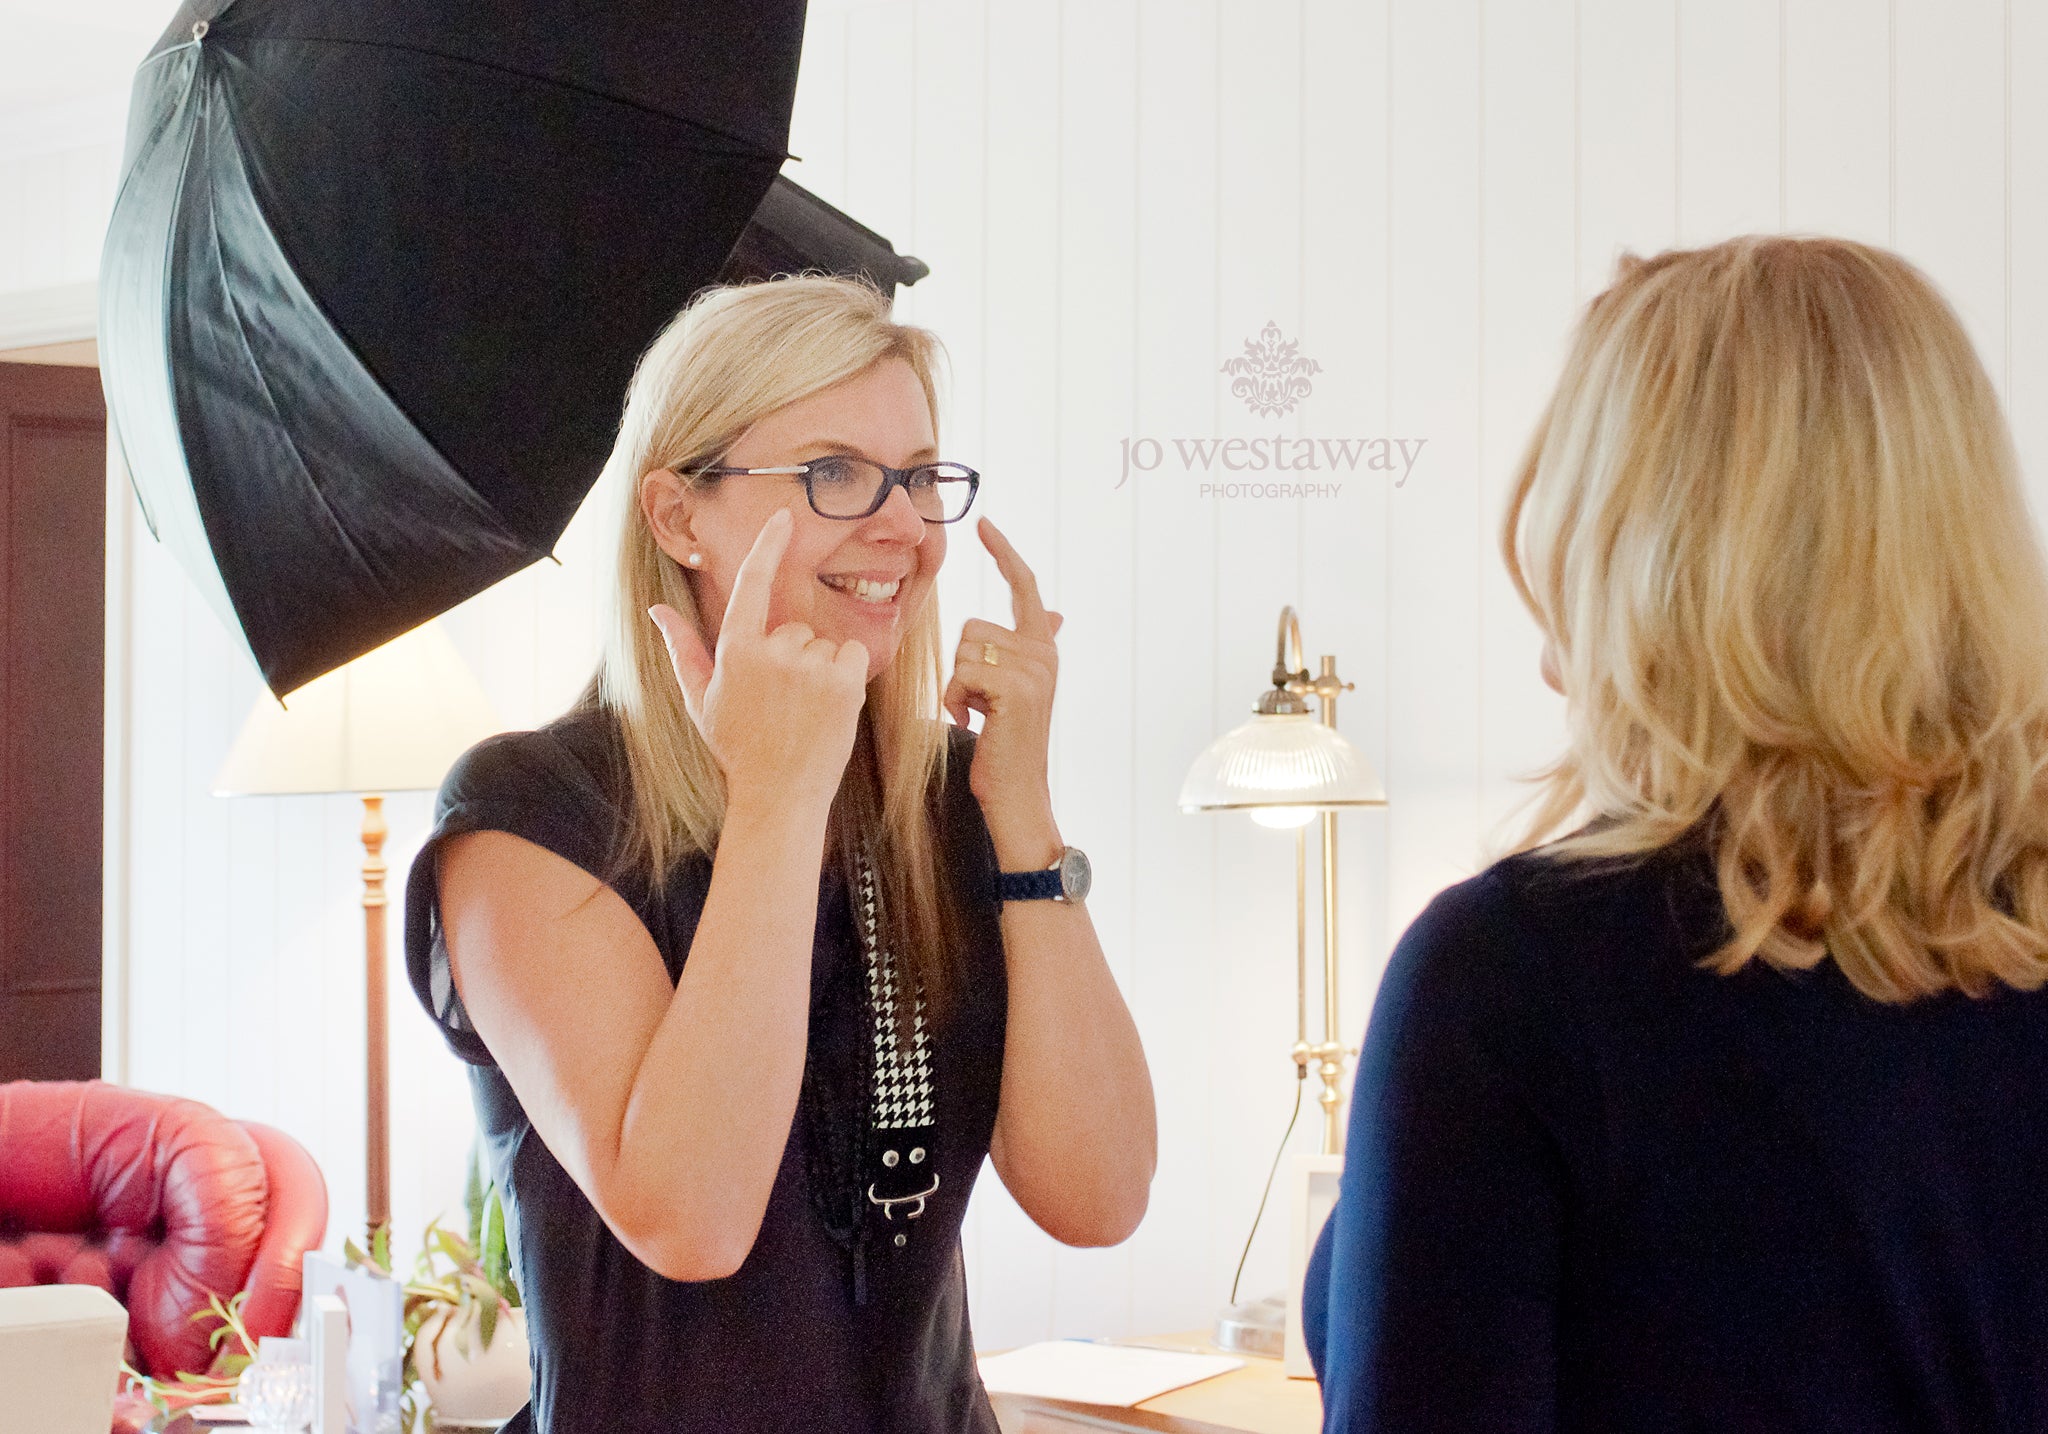 How to get a natural flattering smile in photos - professional brand photography shows her clients